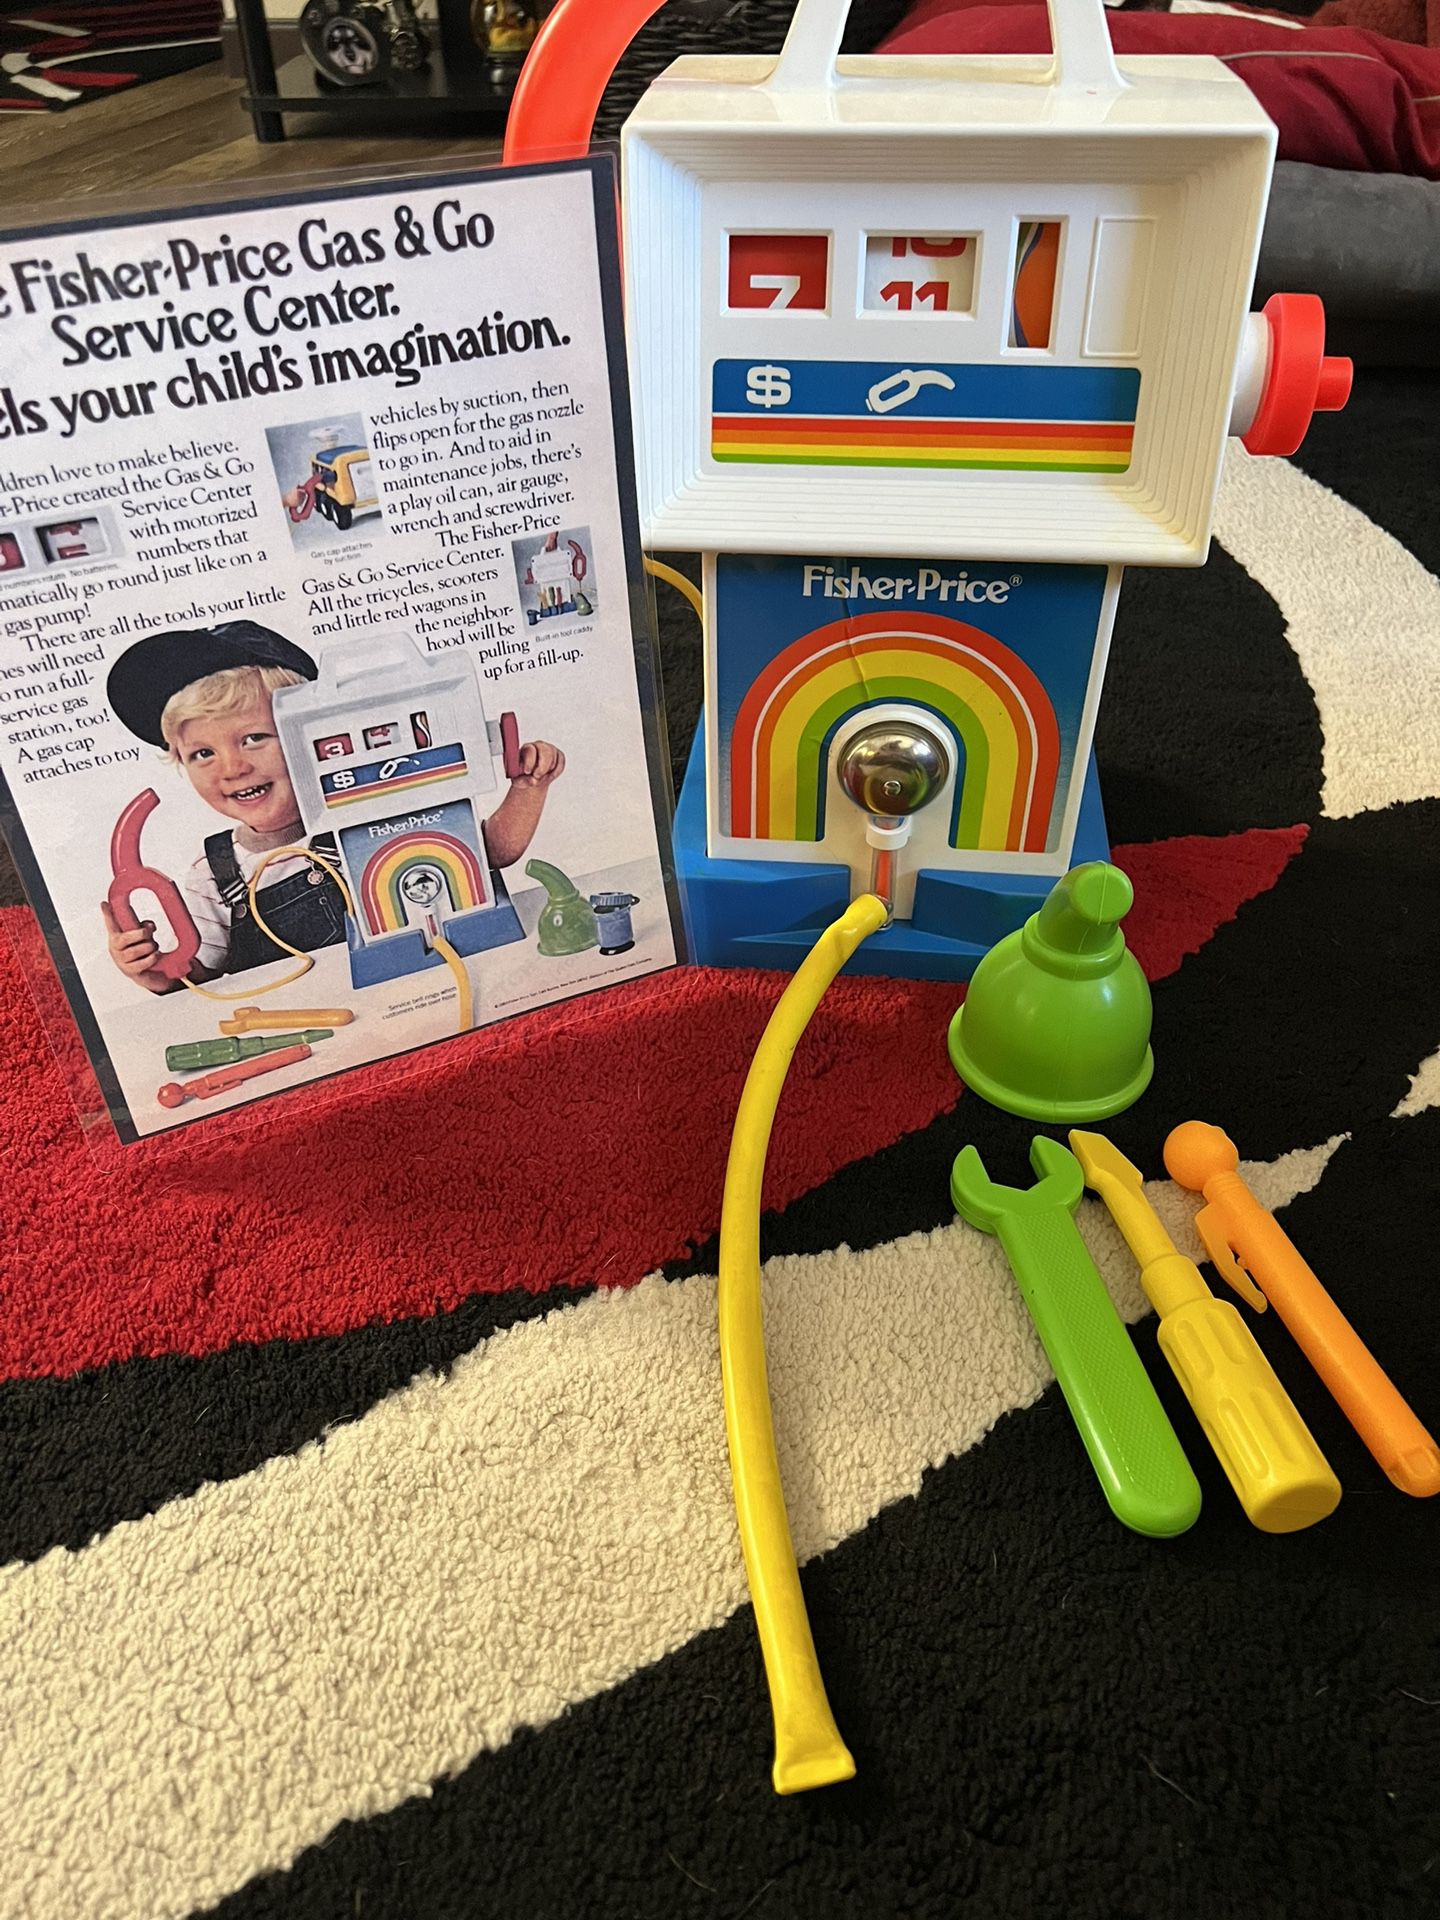 1983 Fisher Price Gas & Go Service Center With Motorized Gas Pump #984